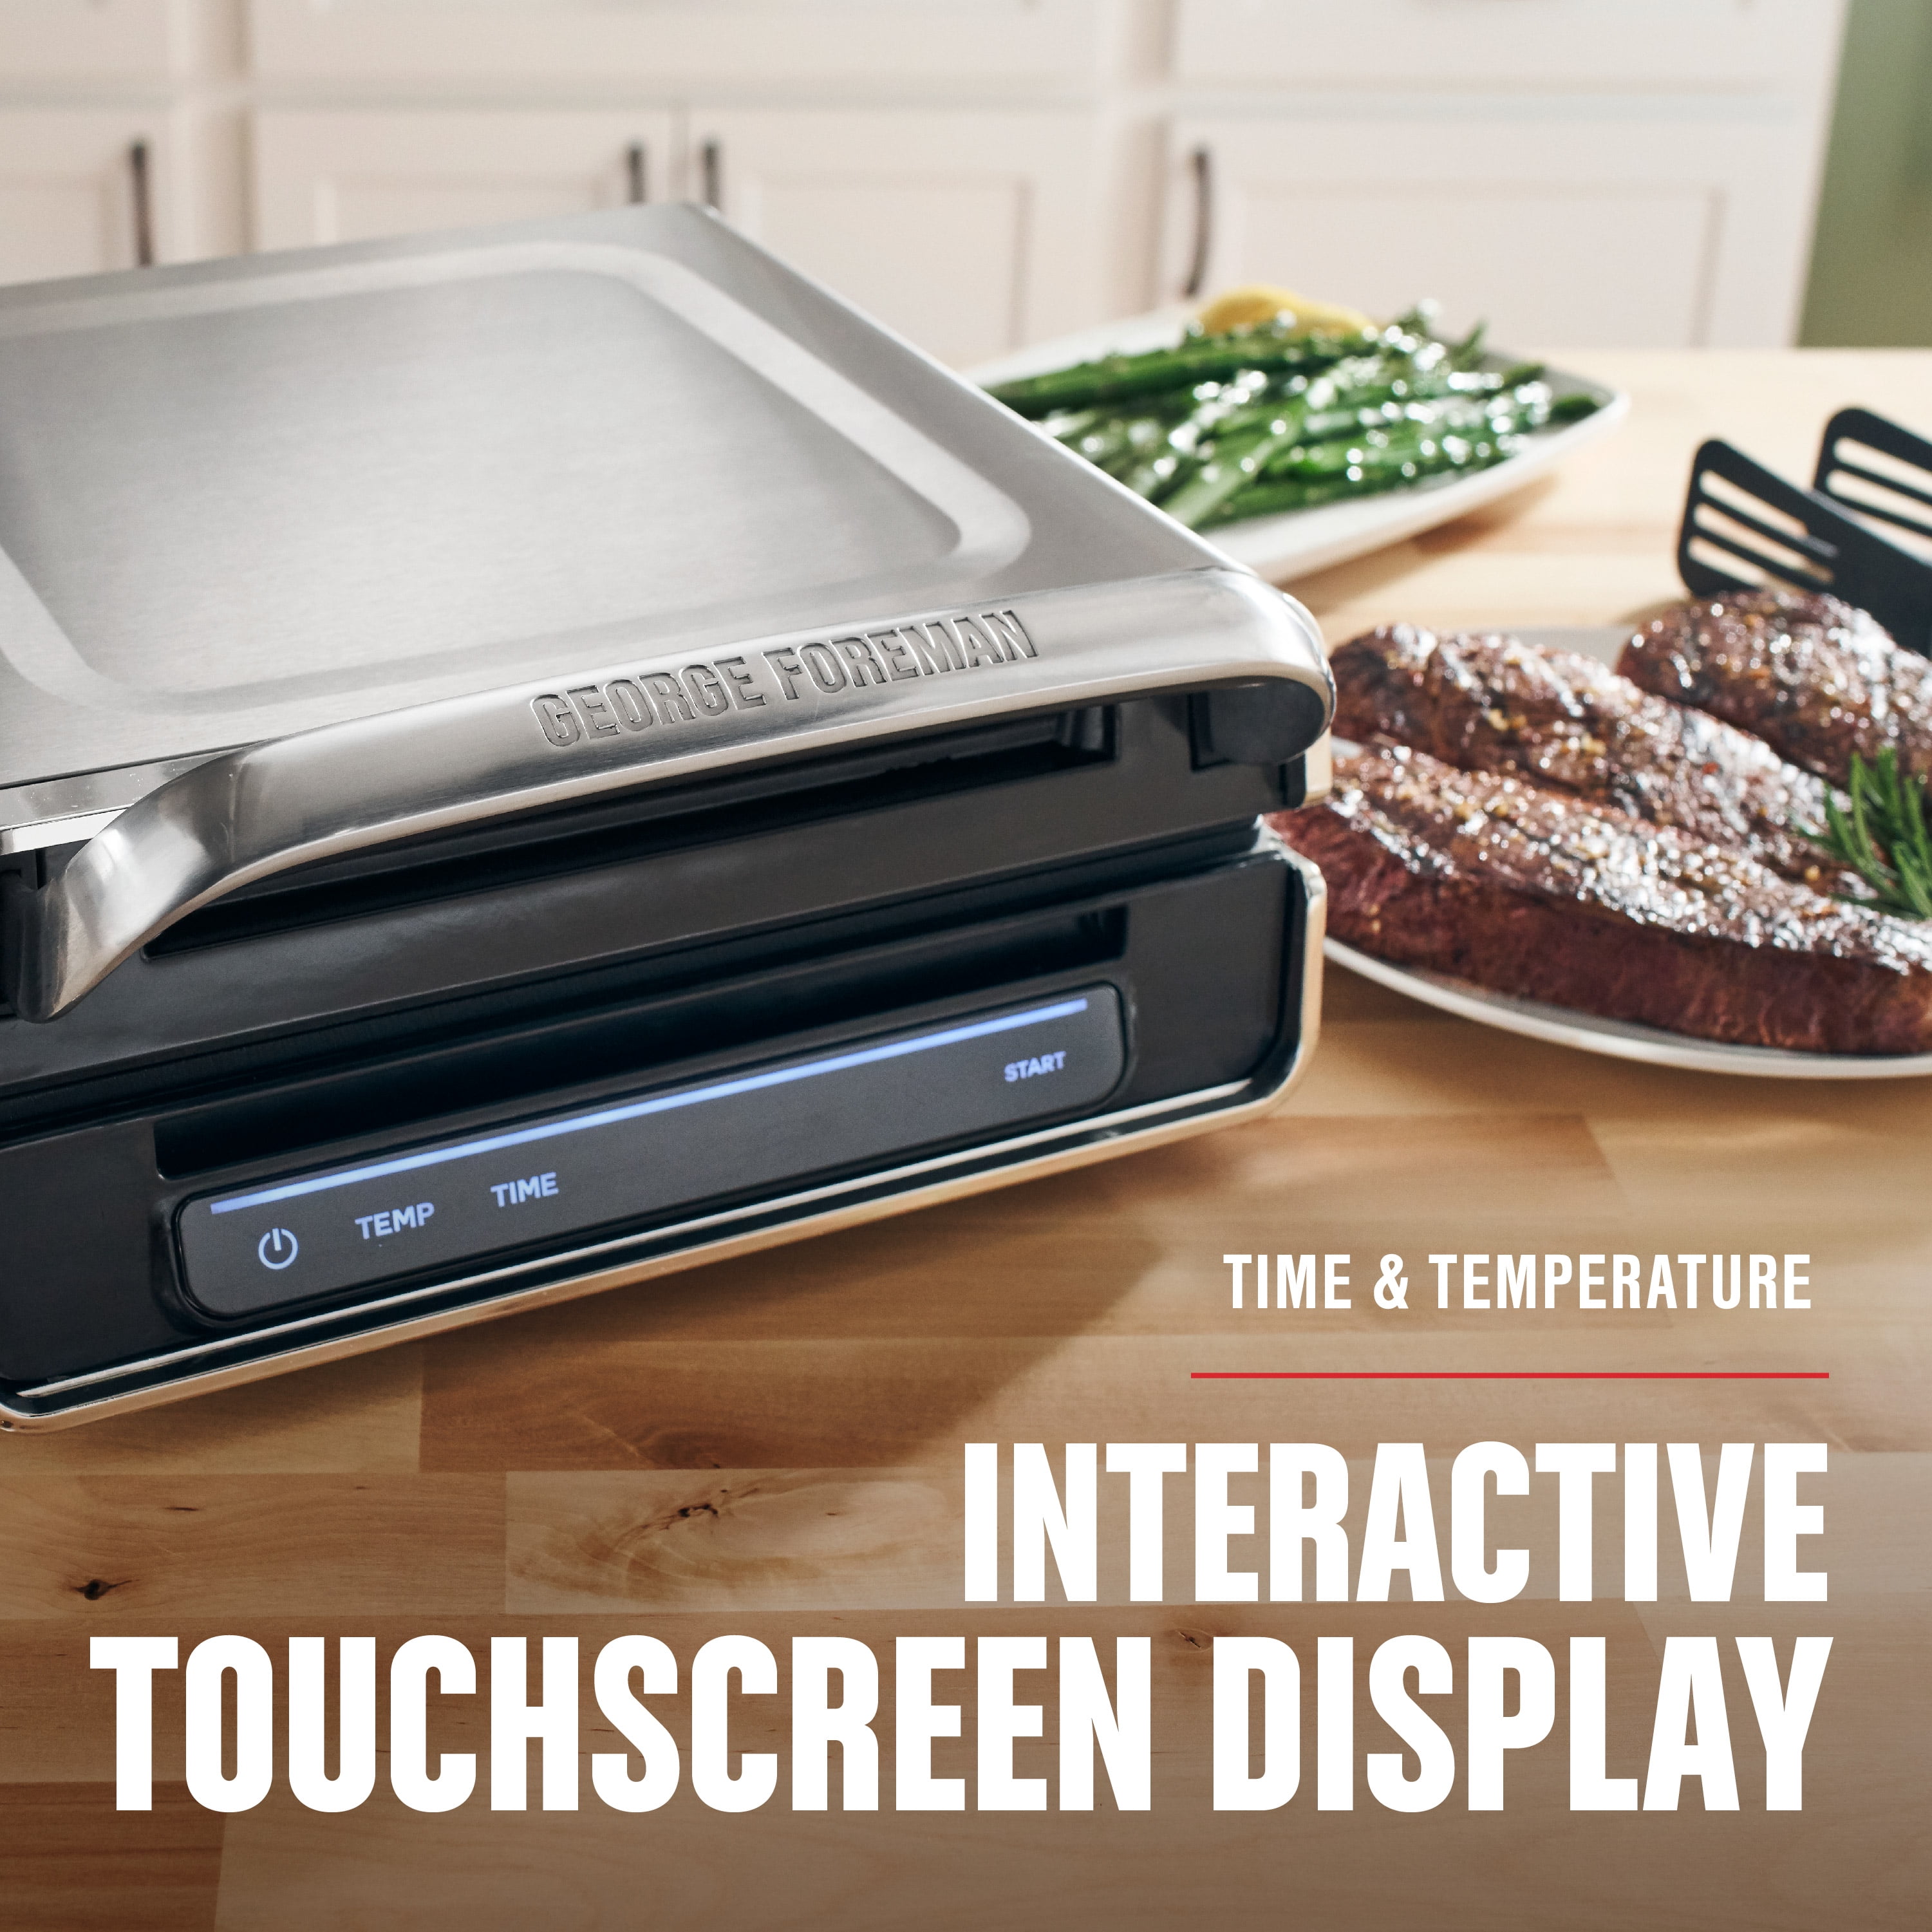 George Foreman Smokeless Grill Series Touchscreen Family Size 4-6 Servings